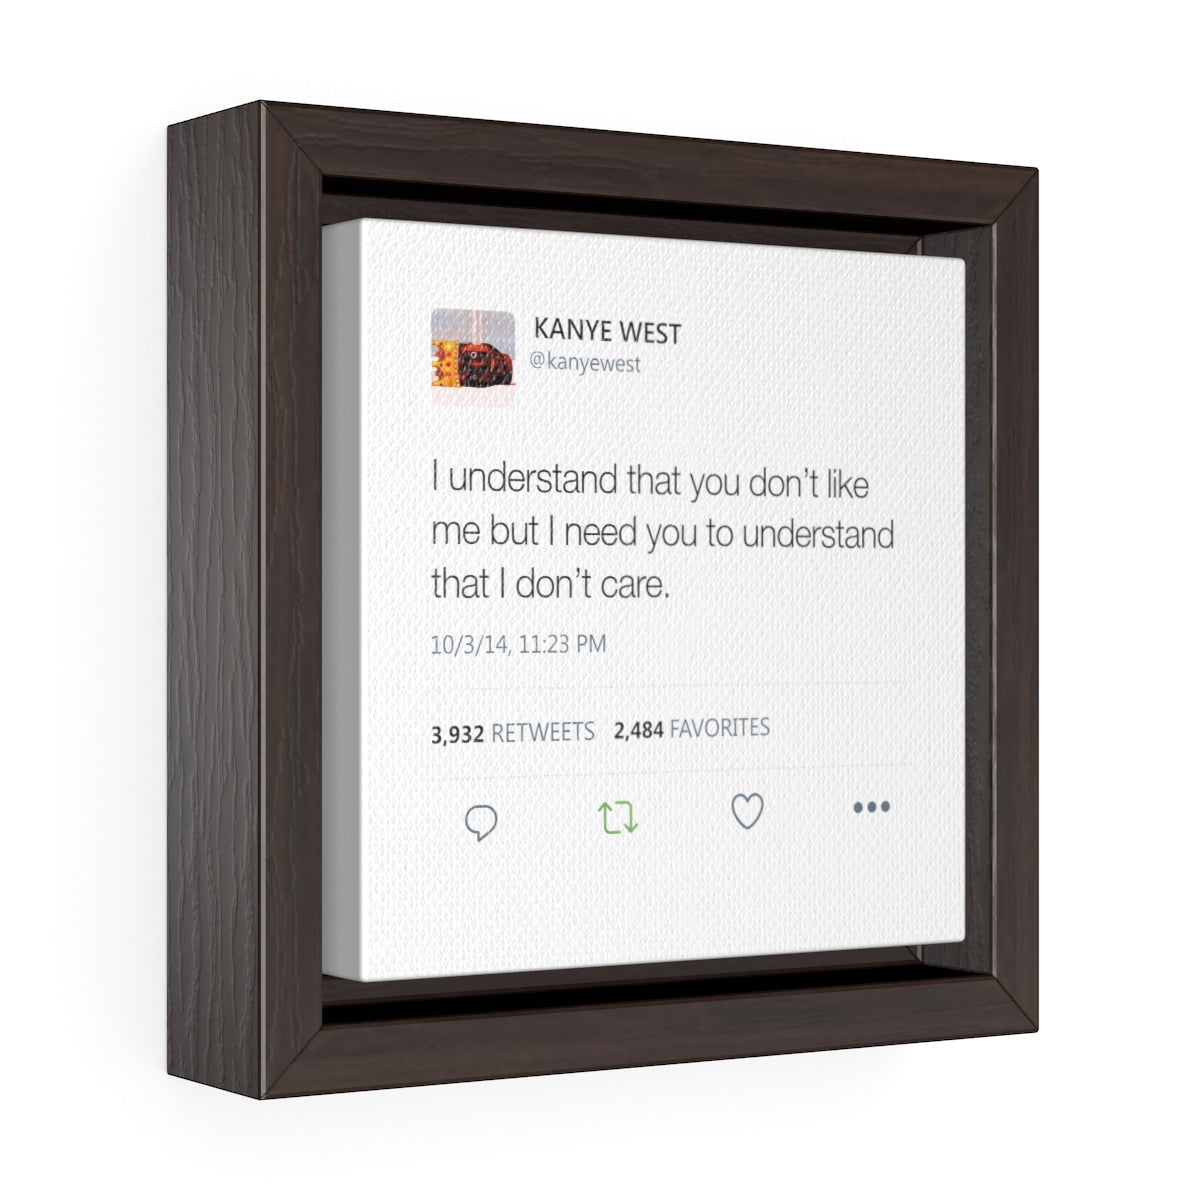 I understand that you don't like me but I need you to understand that I don't care. Kanye West Tweet Quote Square Framed Gallery Wrap Canvas-6″ × 6″-Archethype